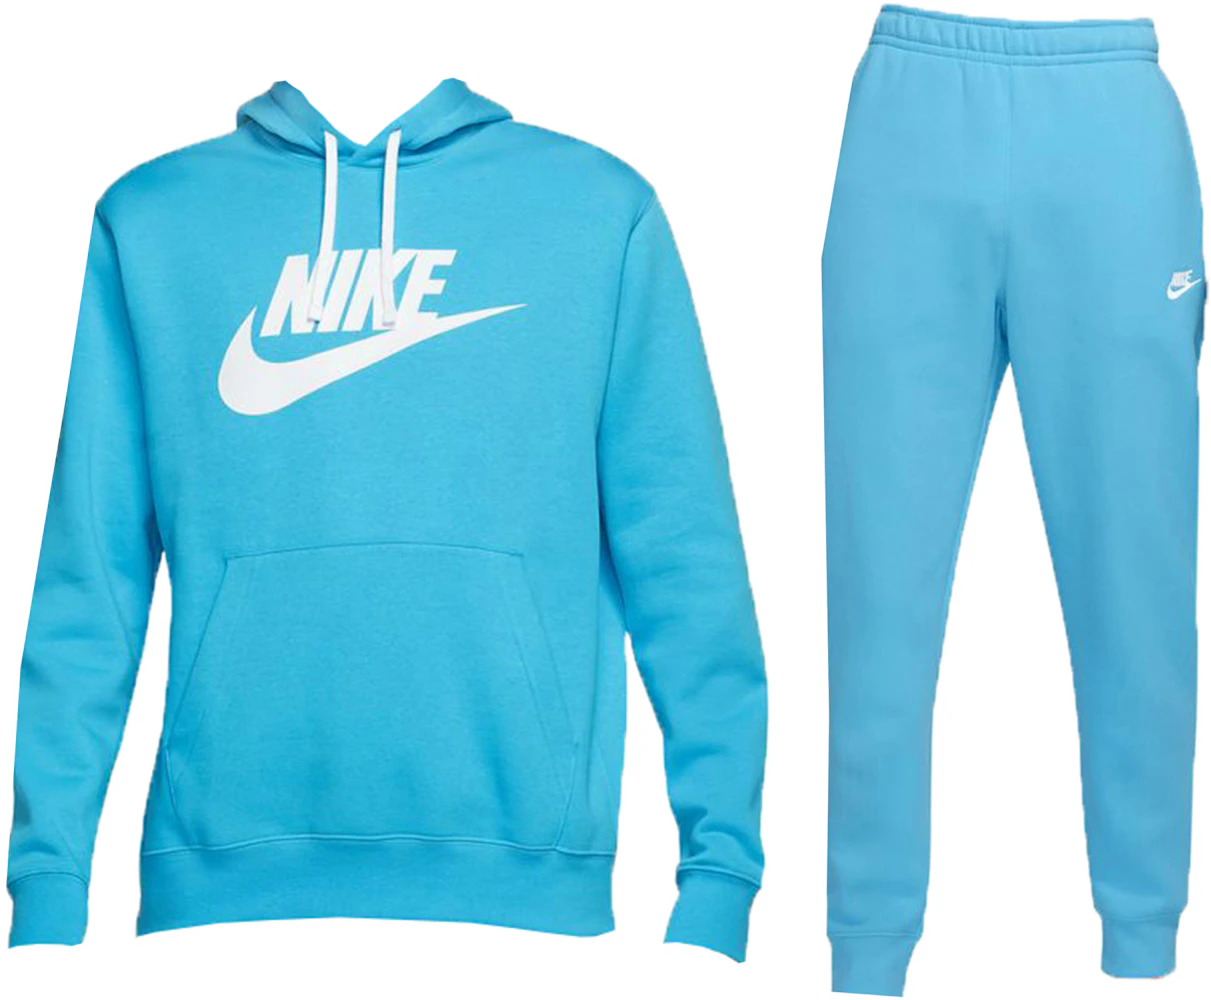 https://images.stockx.com/images/Nike-Sportswear-Club-Fleece-Pullover-Hoodie-Joggers-Set-Baltic-Blue-White-White.jpg?fit=fill&bg=FFFFFF&w=700&h=500&fm=webp&auto=compress&q=90&dpr=2&trim=color&updated_at=1676666831